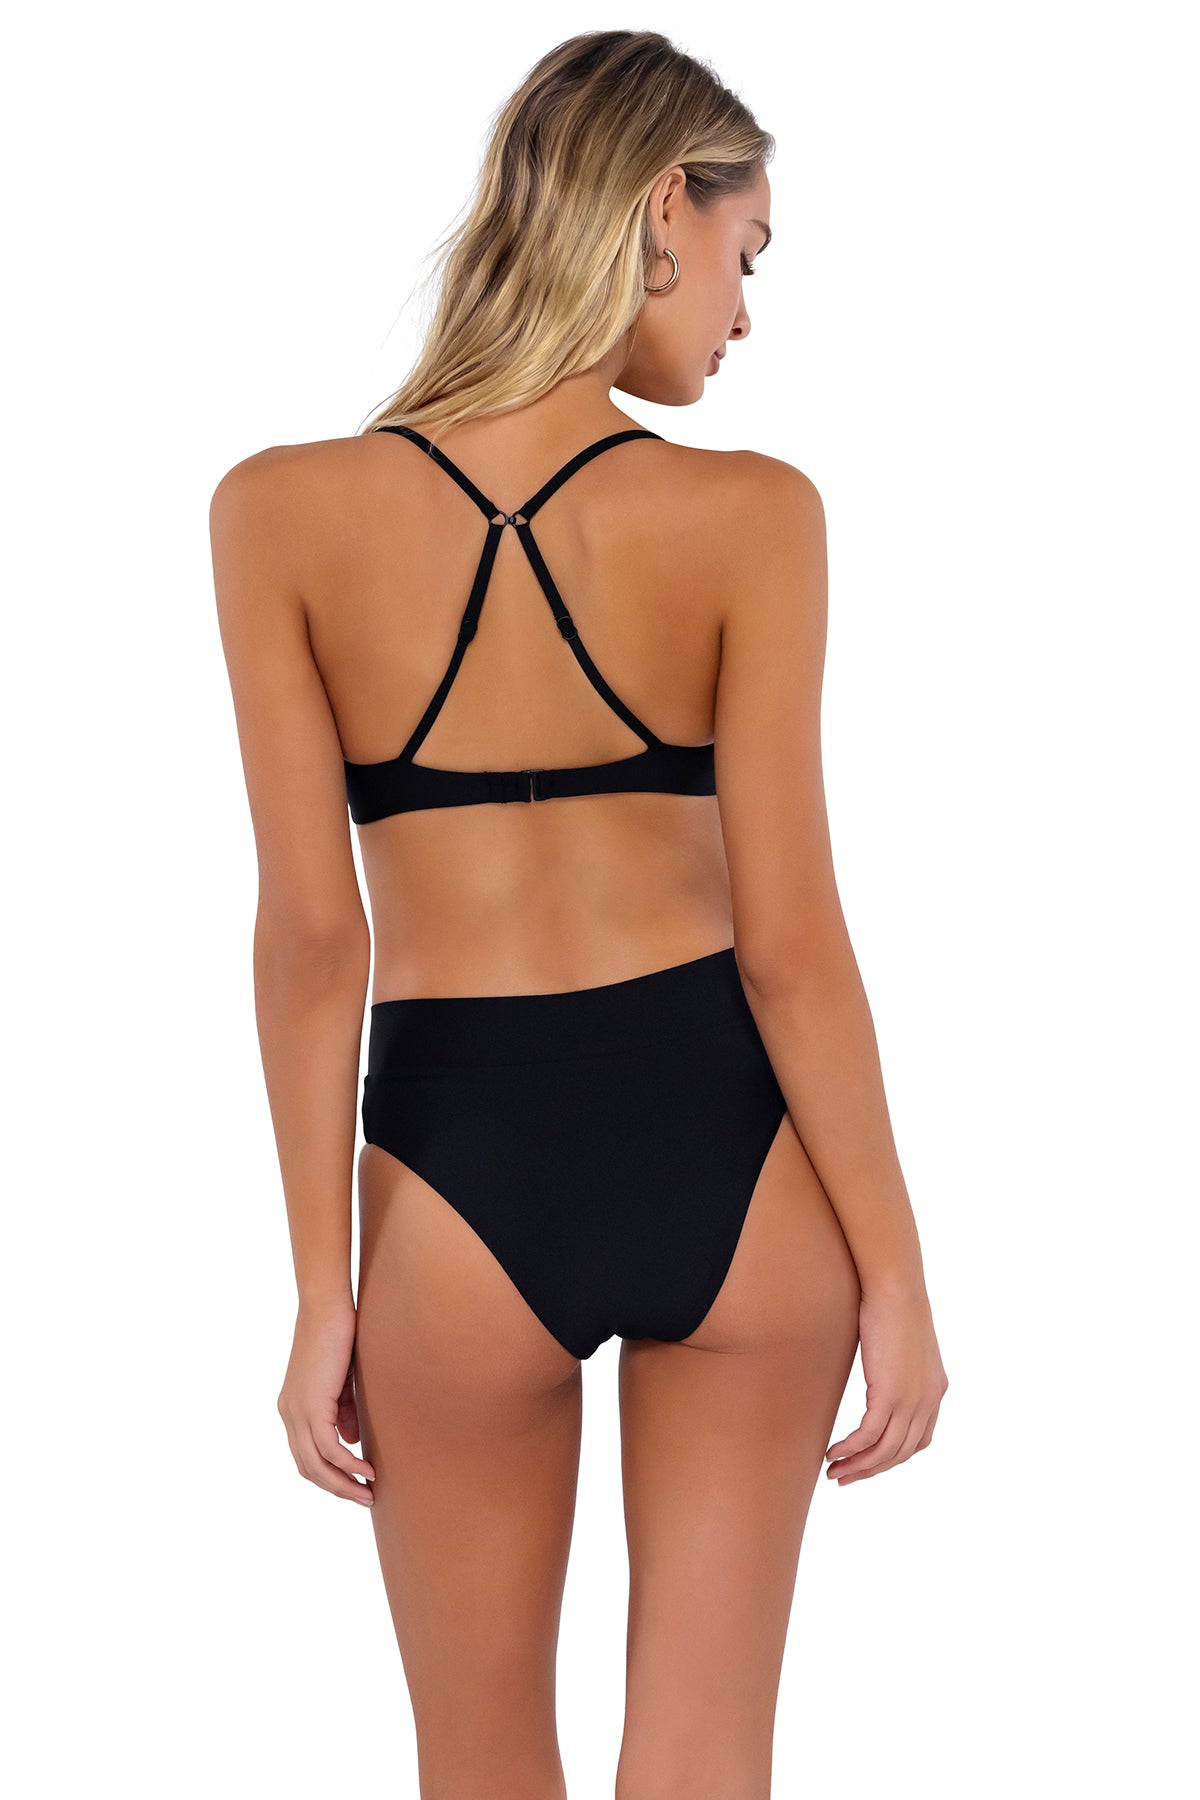 Back pose #1 of Jessica wearing Swim Systems Black Avila Underwire Top showing crossback straps with matching Delfina V Front bikini bottom